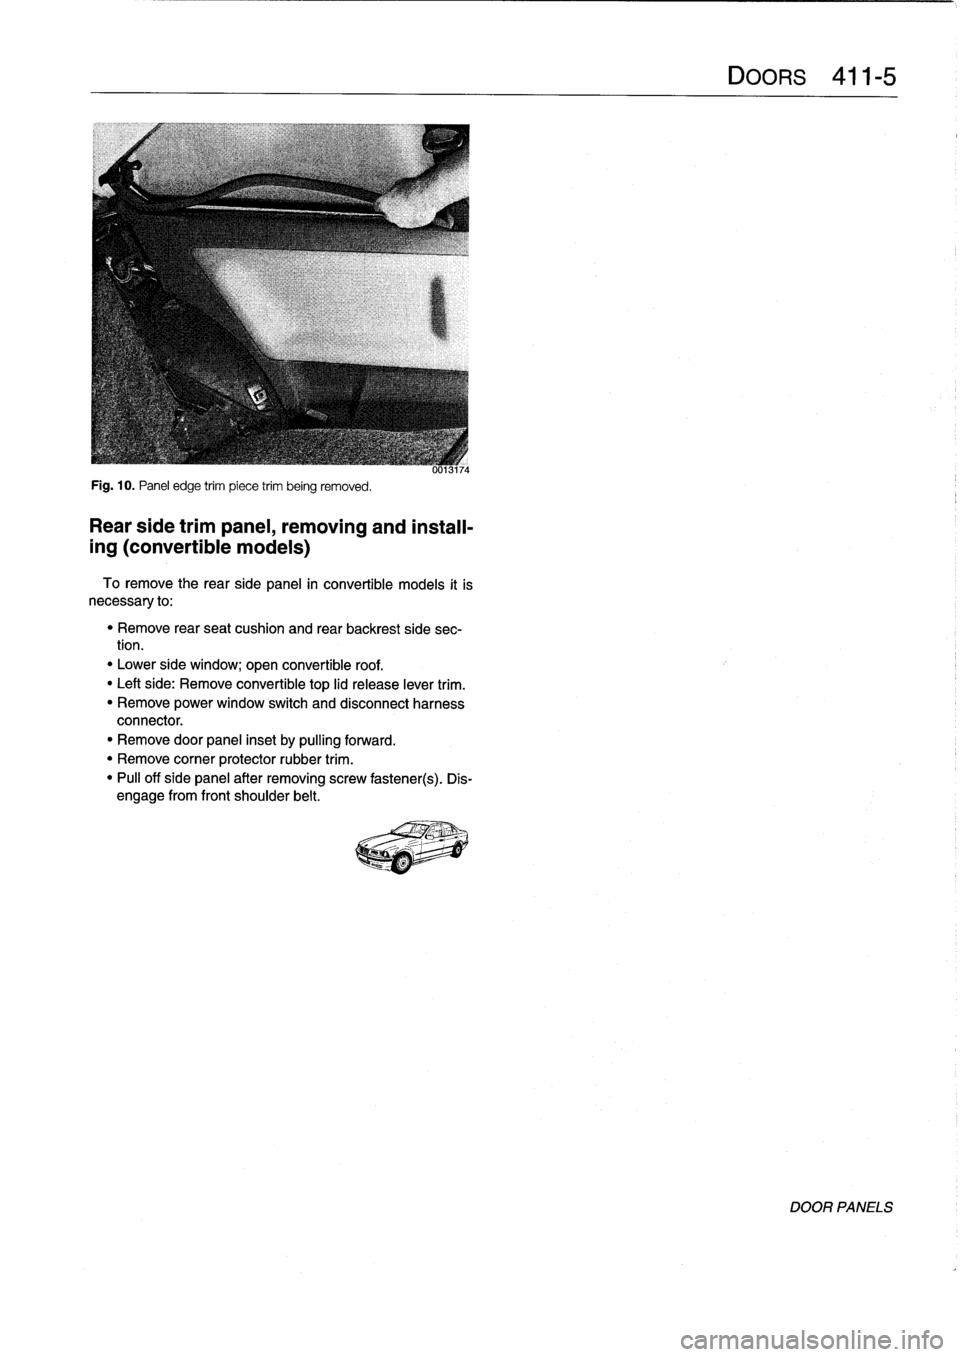 BMW 318i 1997 E36 User Guide 
Fig
.
10
.
Panel
edge
trim
piece
trim
being
removed
.

Rear
side
trimpanel,
removing
and
install-

ing
(convertible
models)

To
remove
the
rearside
panel
in
convertible
models
it
is
necessary
to
:

"